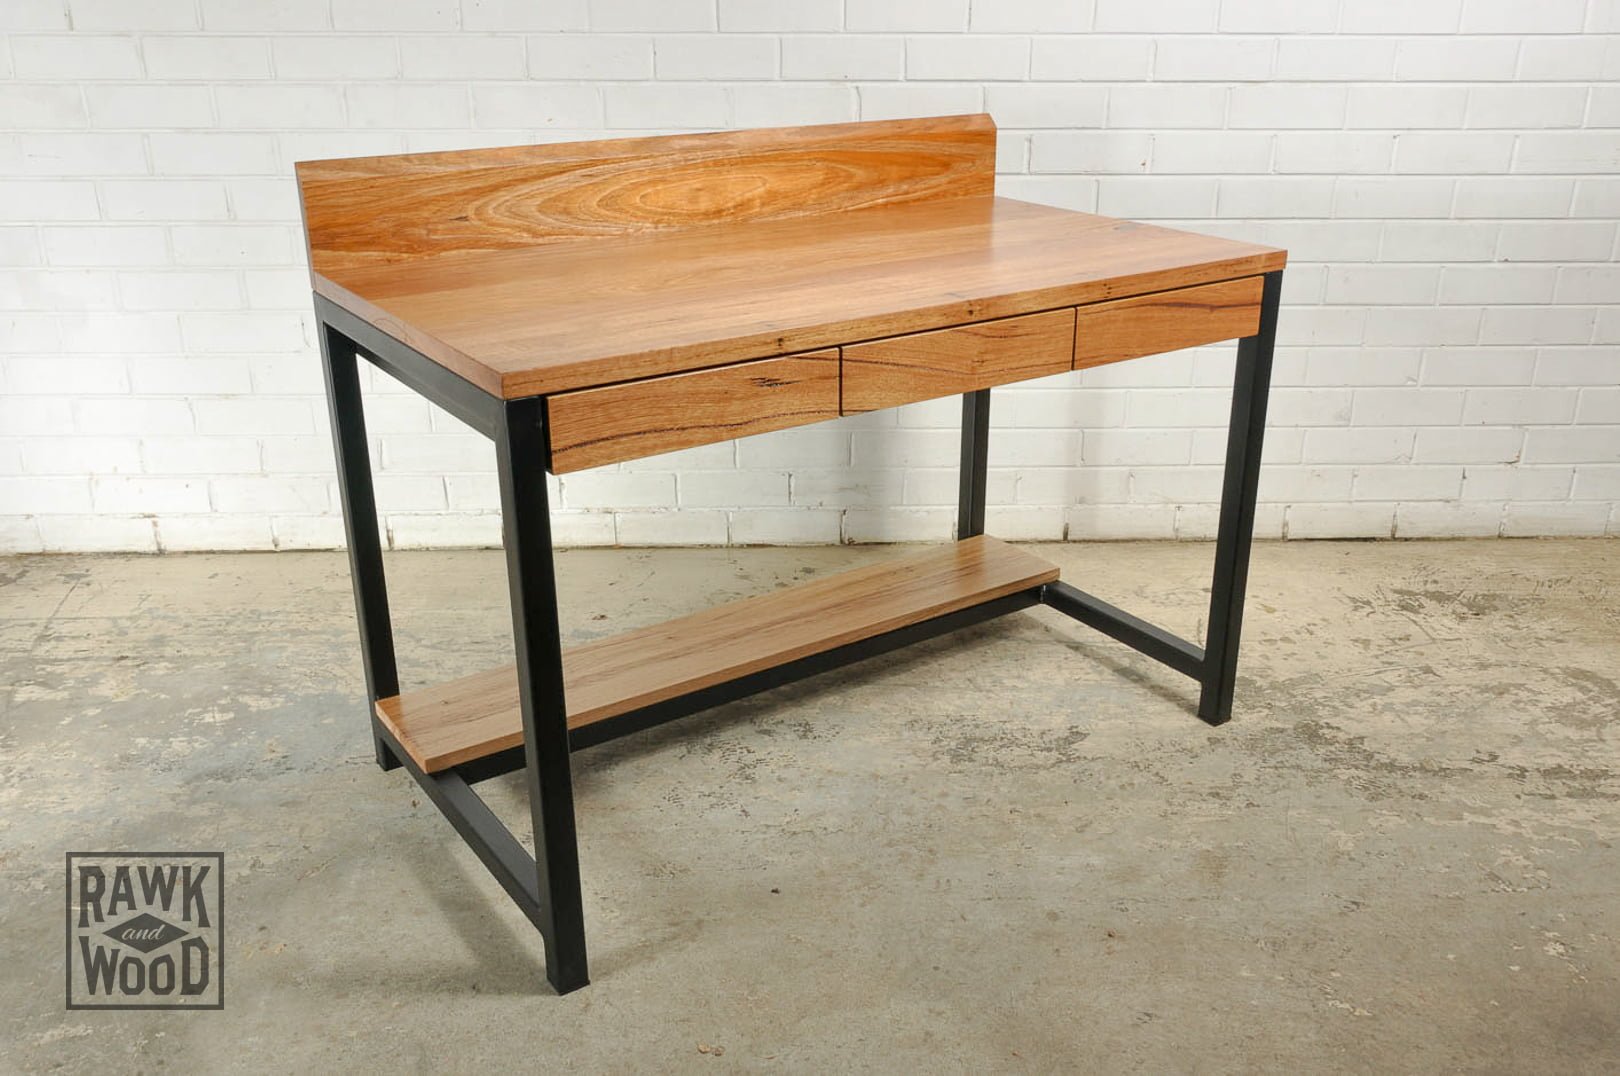 Recycled-Timber-Desk, made in Melbourne by Rawk and Wood